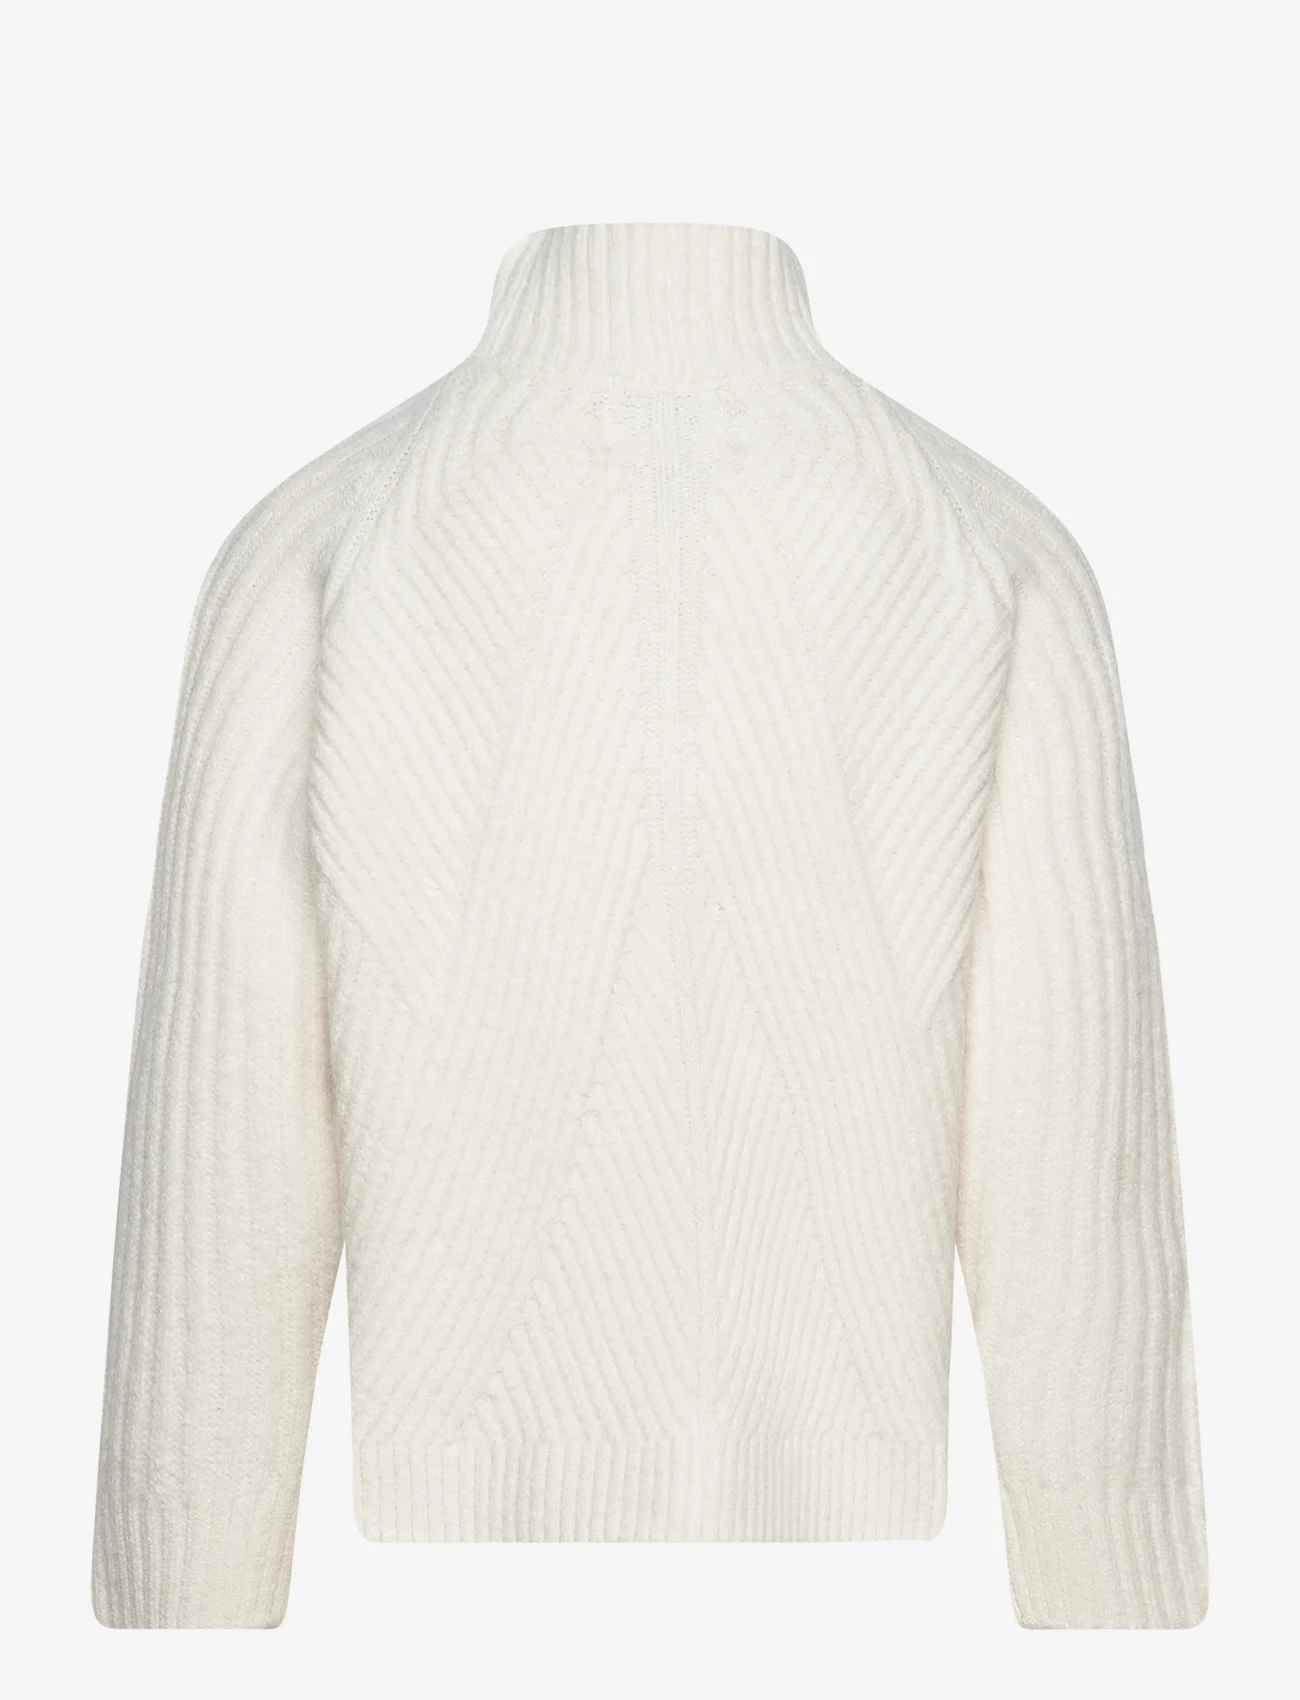 Sofie Schnoor Young - Sweater - tröjor - off white - 1